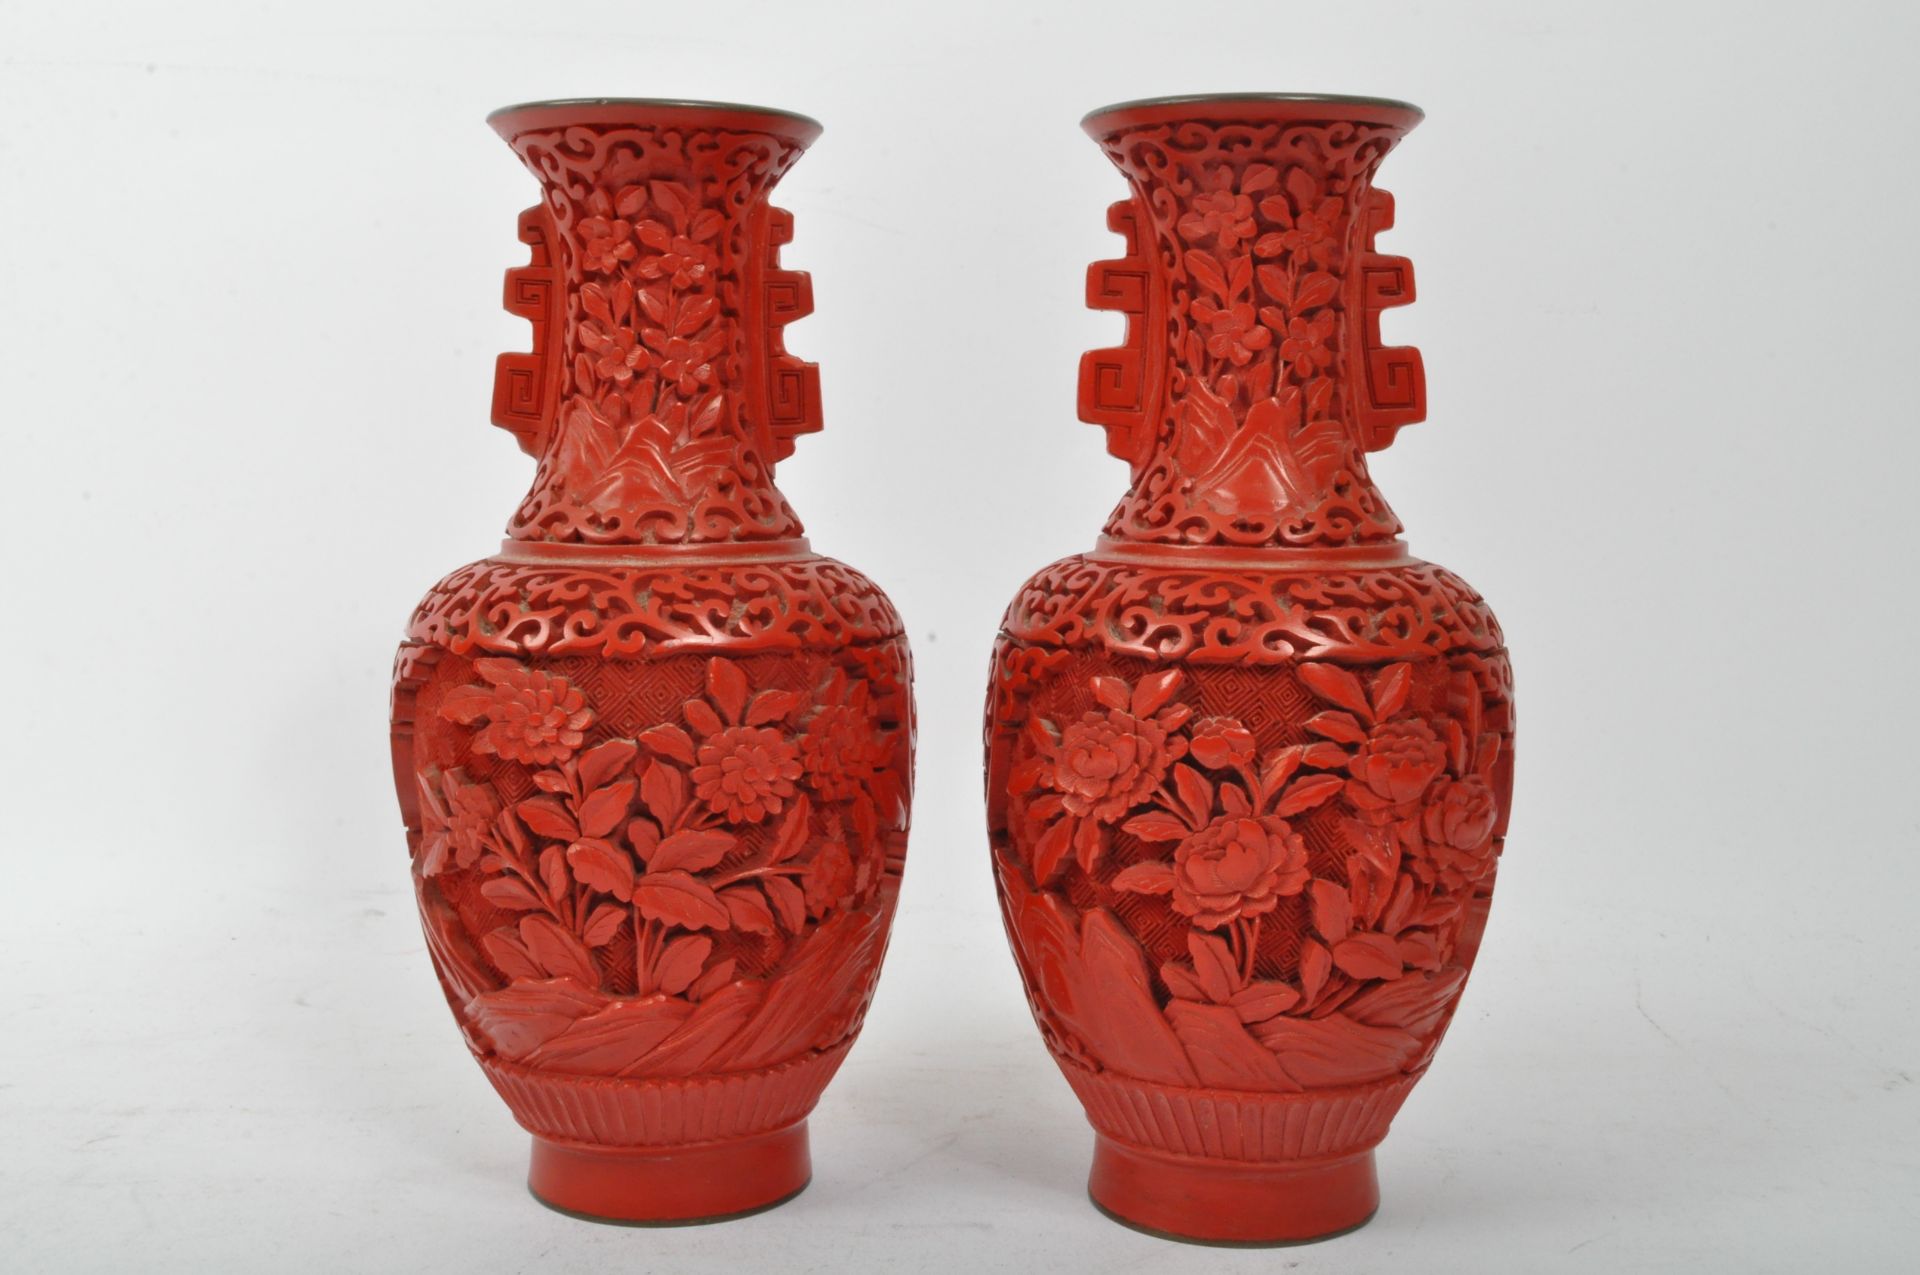 PAIR OF CHINESE RED CINNABAR CARVED VASES